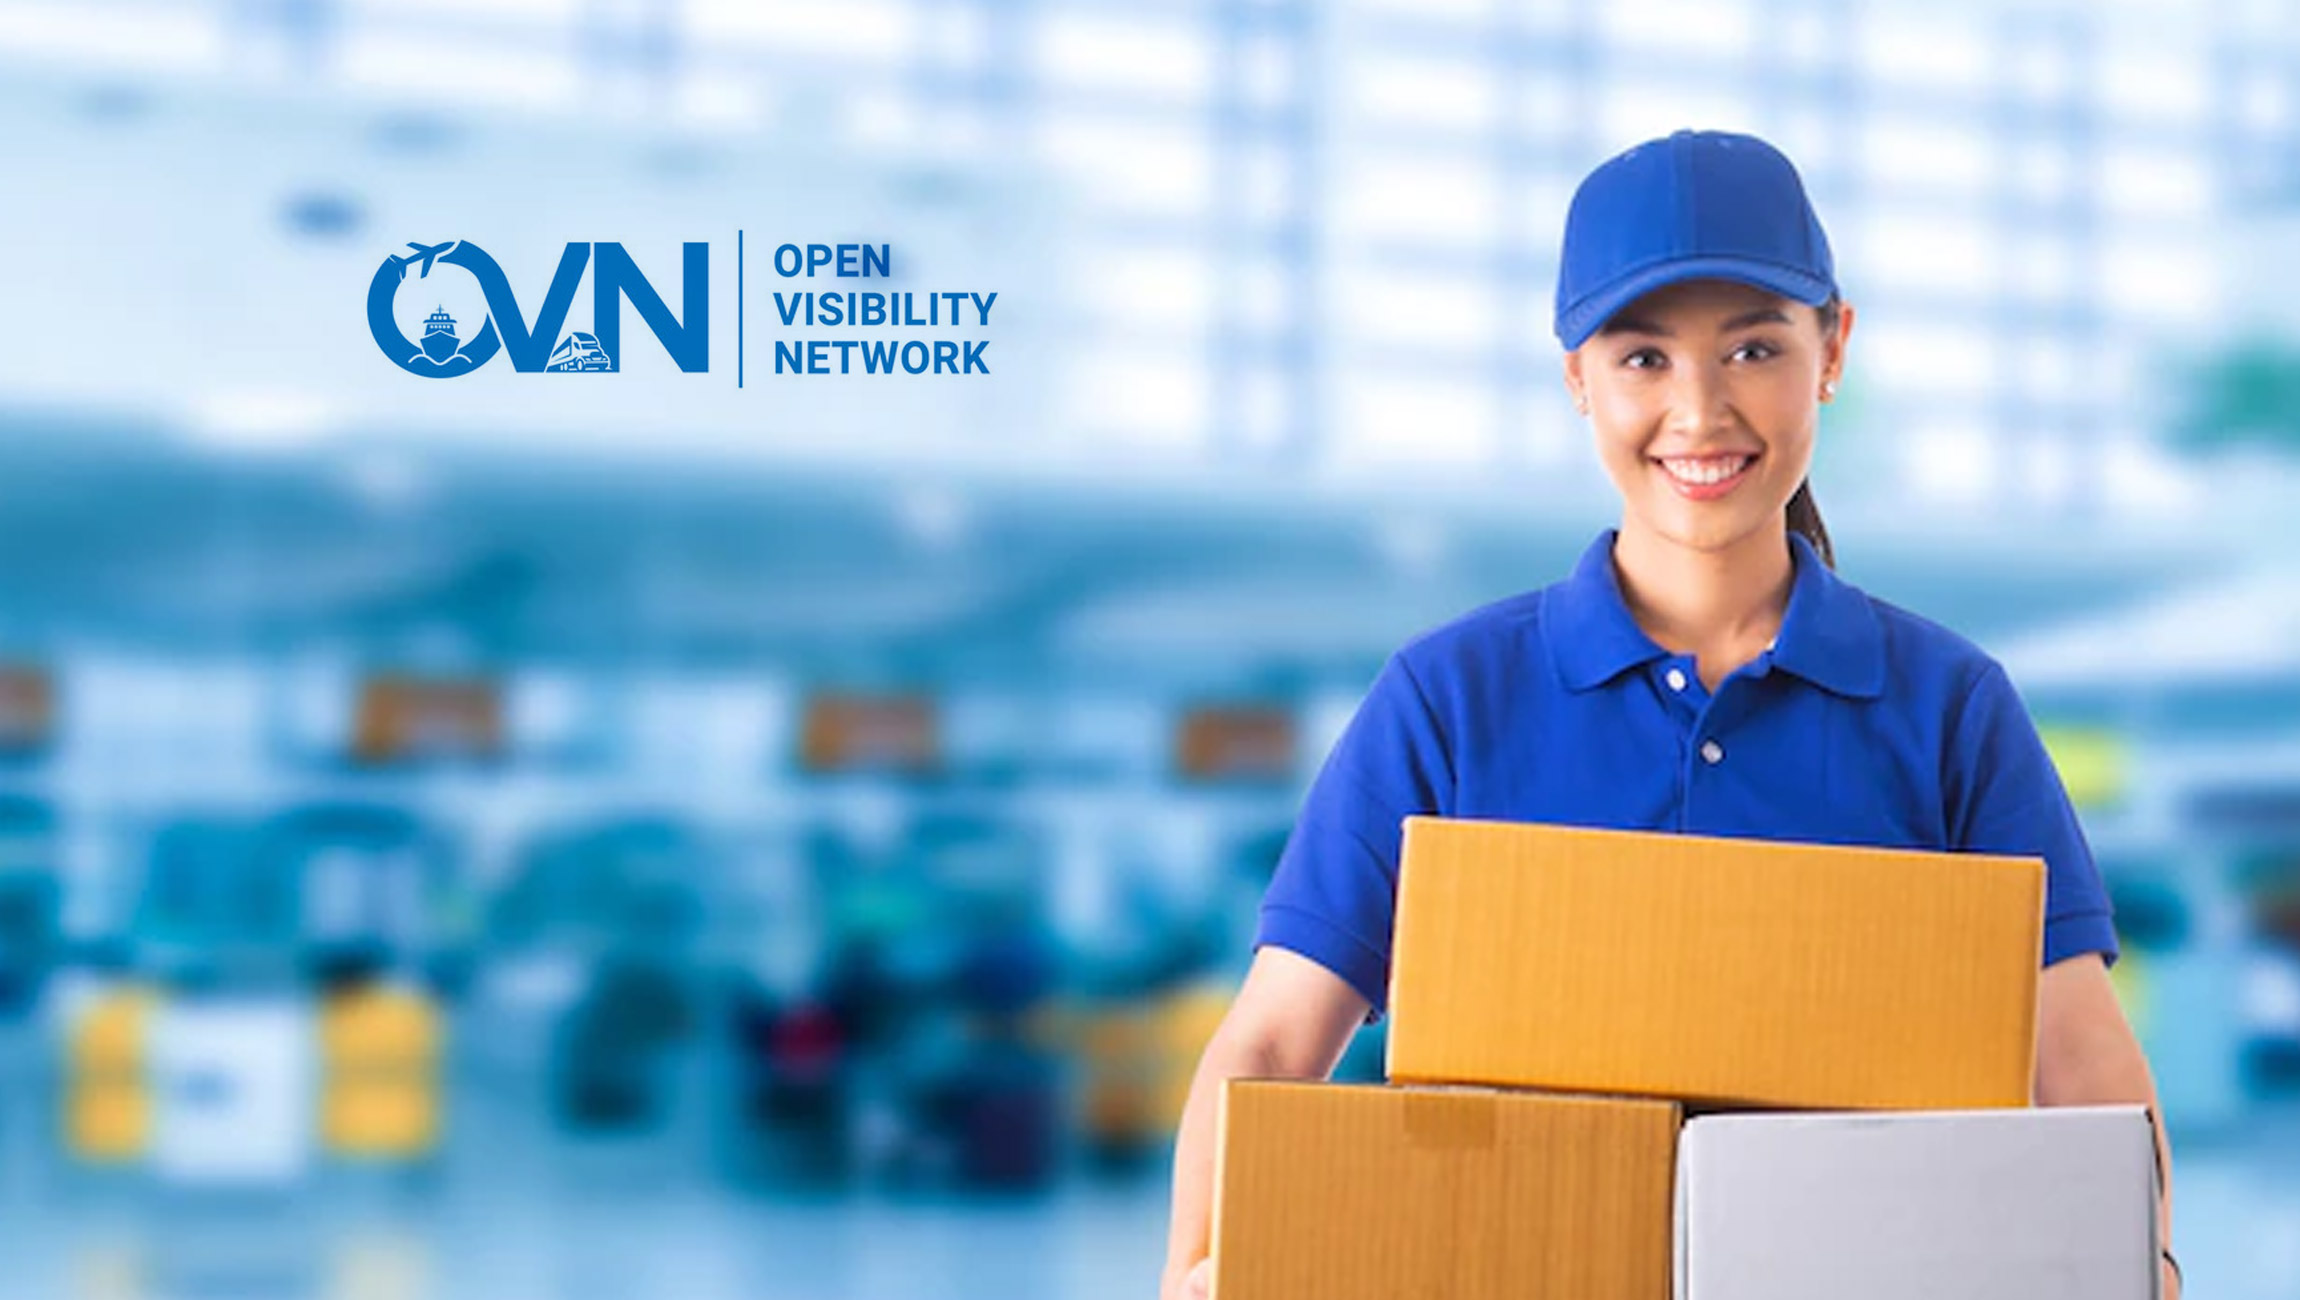 Open-Visibility-Network-Shows-Explosive-Growth---FarEye-Joins-Visibility-Leaders-to-Predict-Shipment-Journeys-and-Improve-the-Delivery-Experience